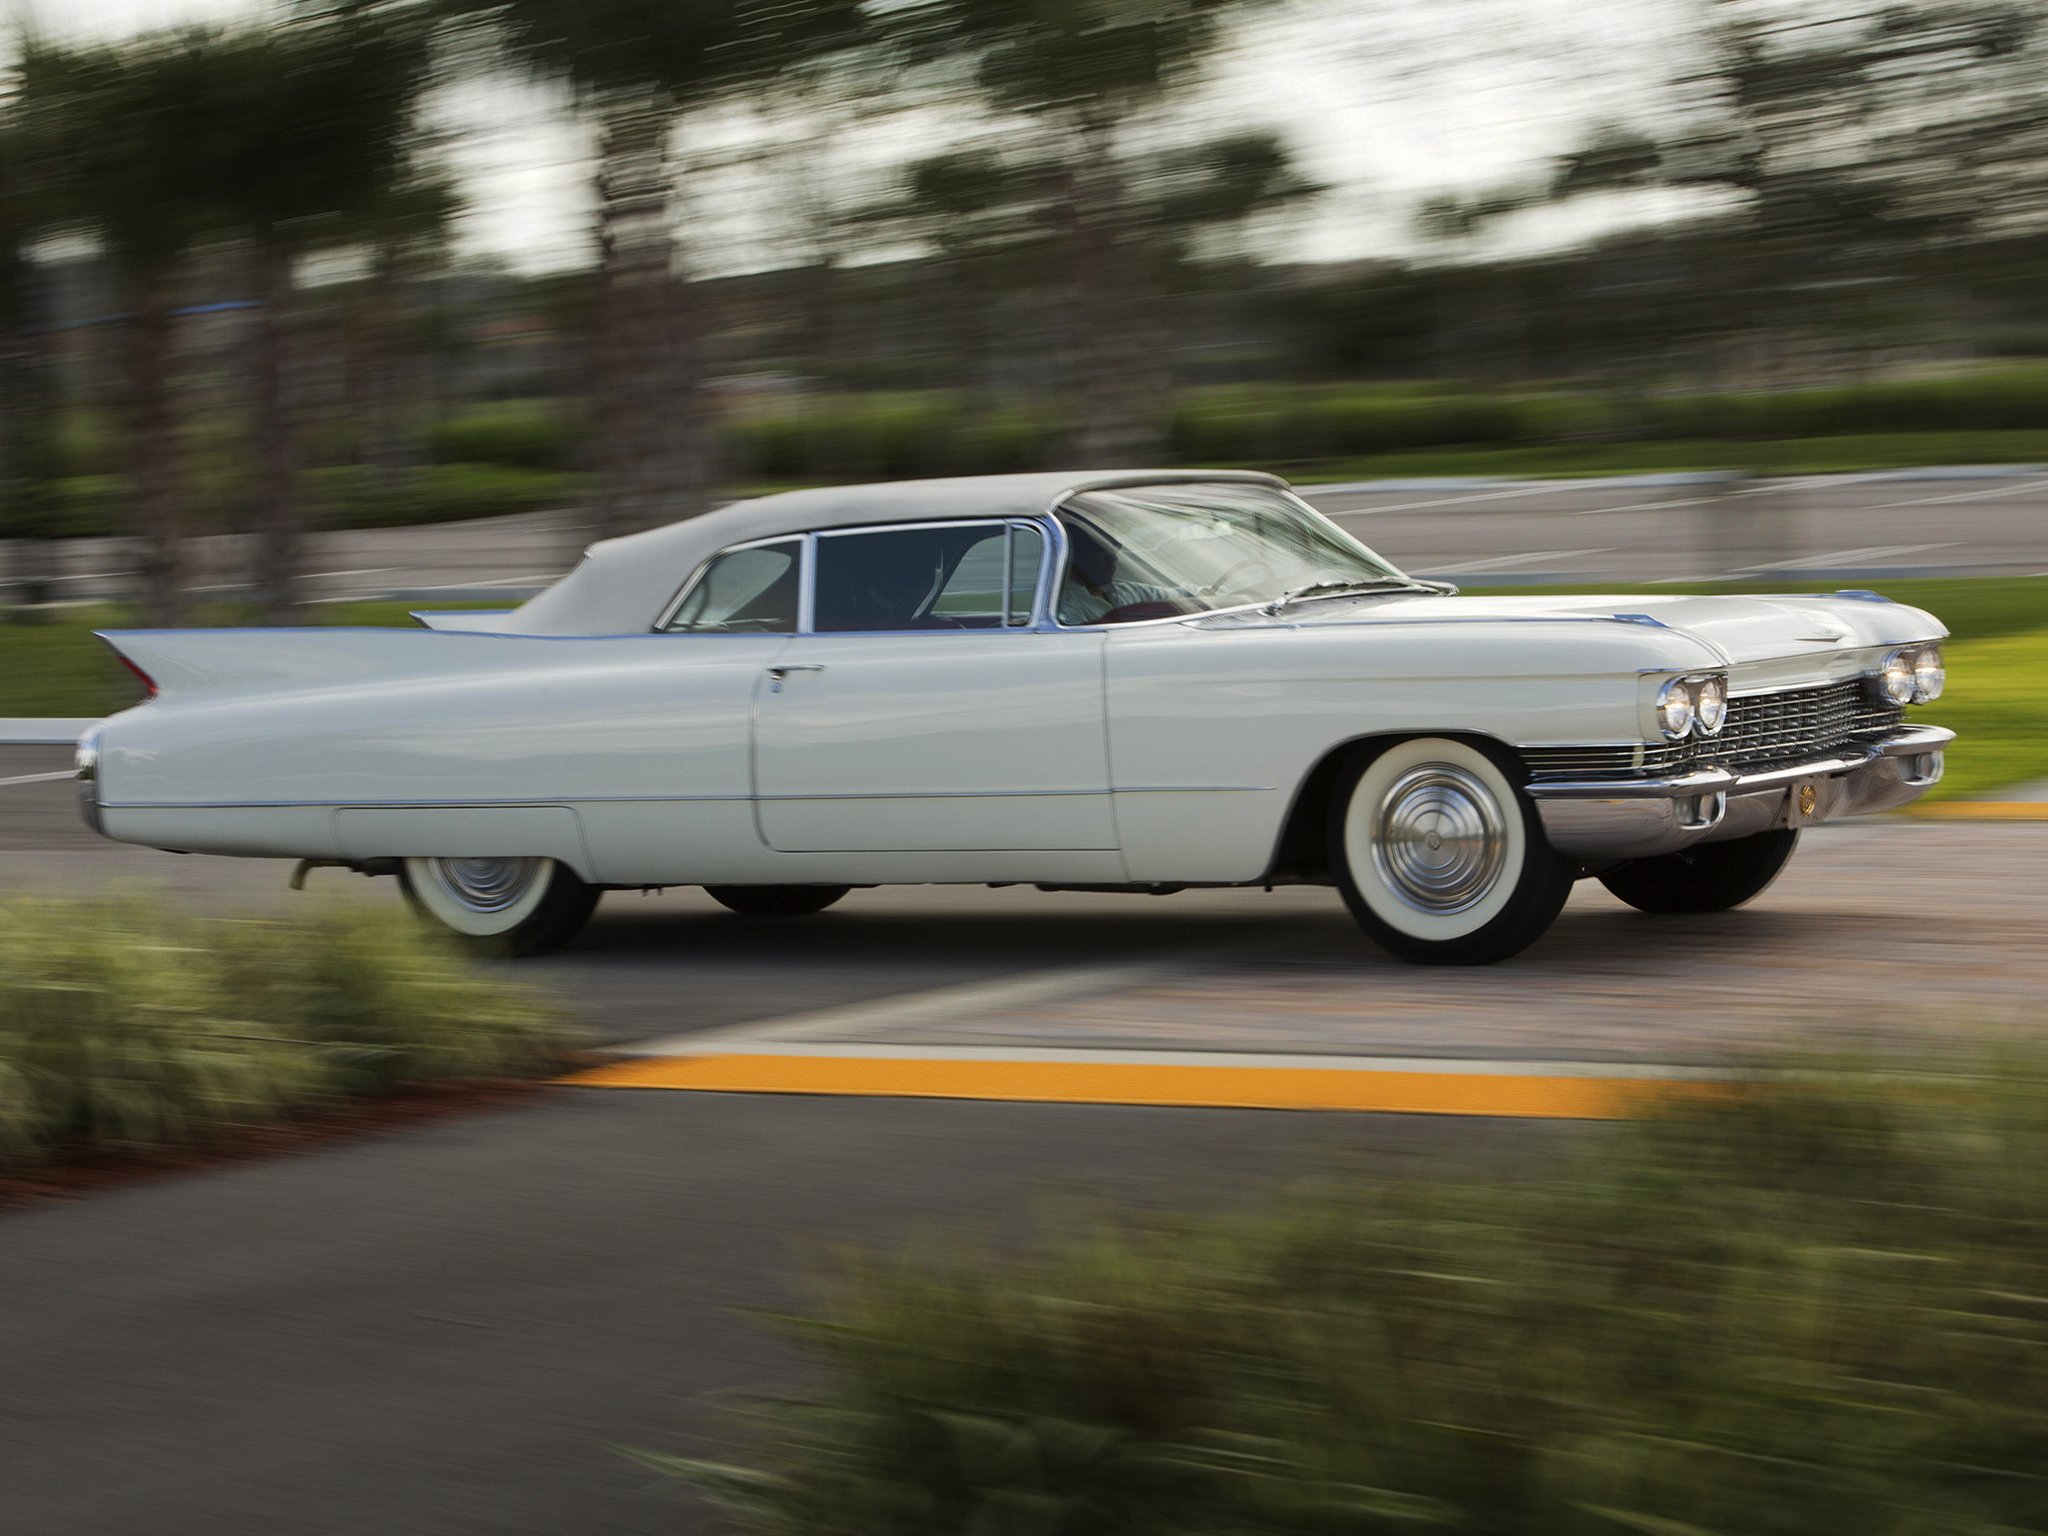 1960, Cadillac, Sixty two, Convertible, 6267f, Luxury, Classic Wallpaper